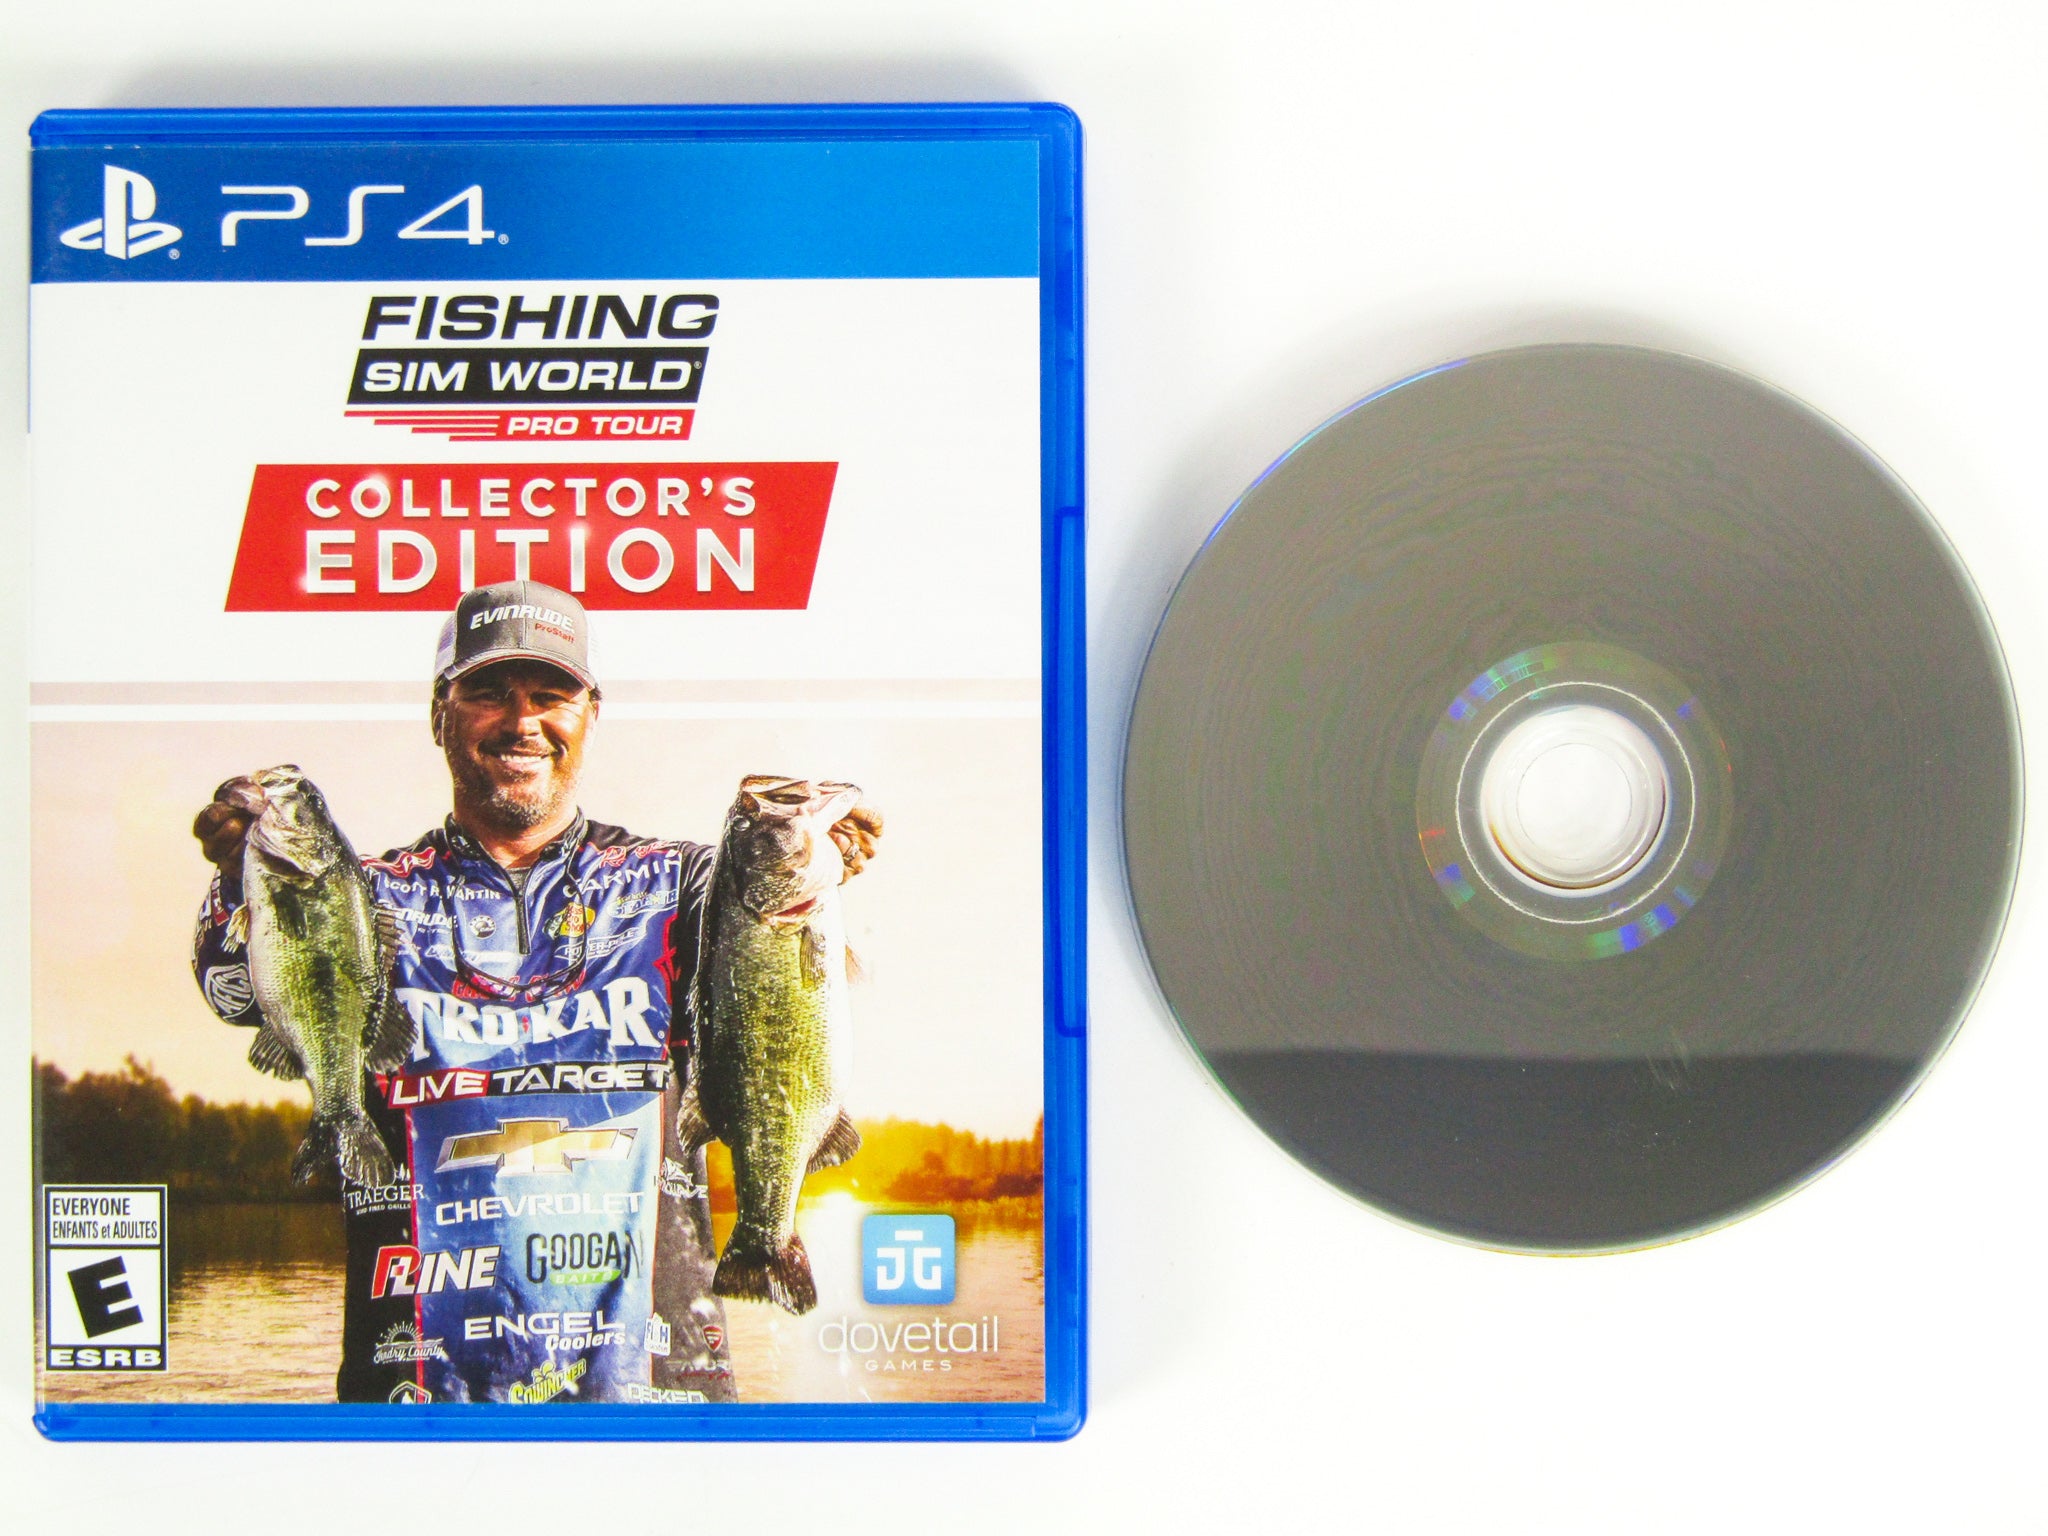 Fishing Sim World: Pro Tour Collector's Edition (Playstation 4